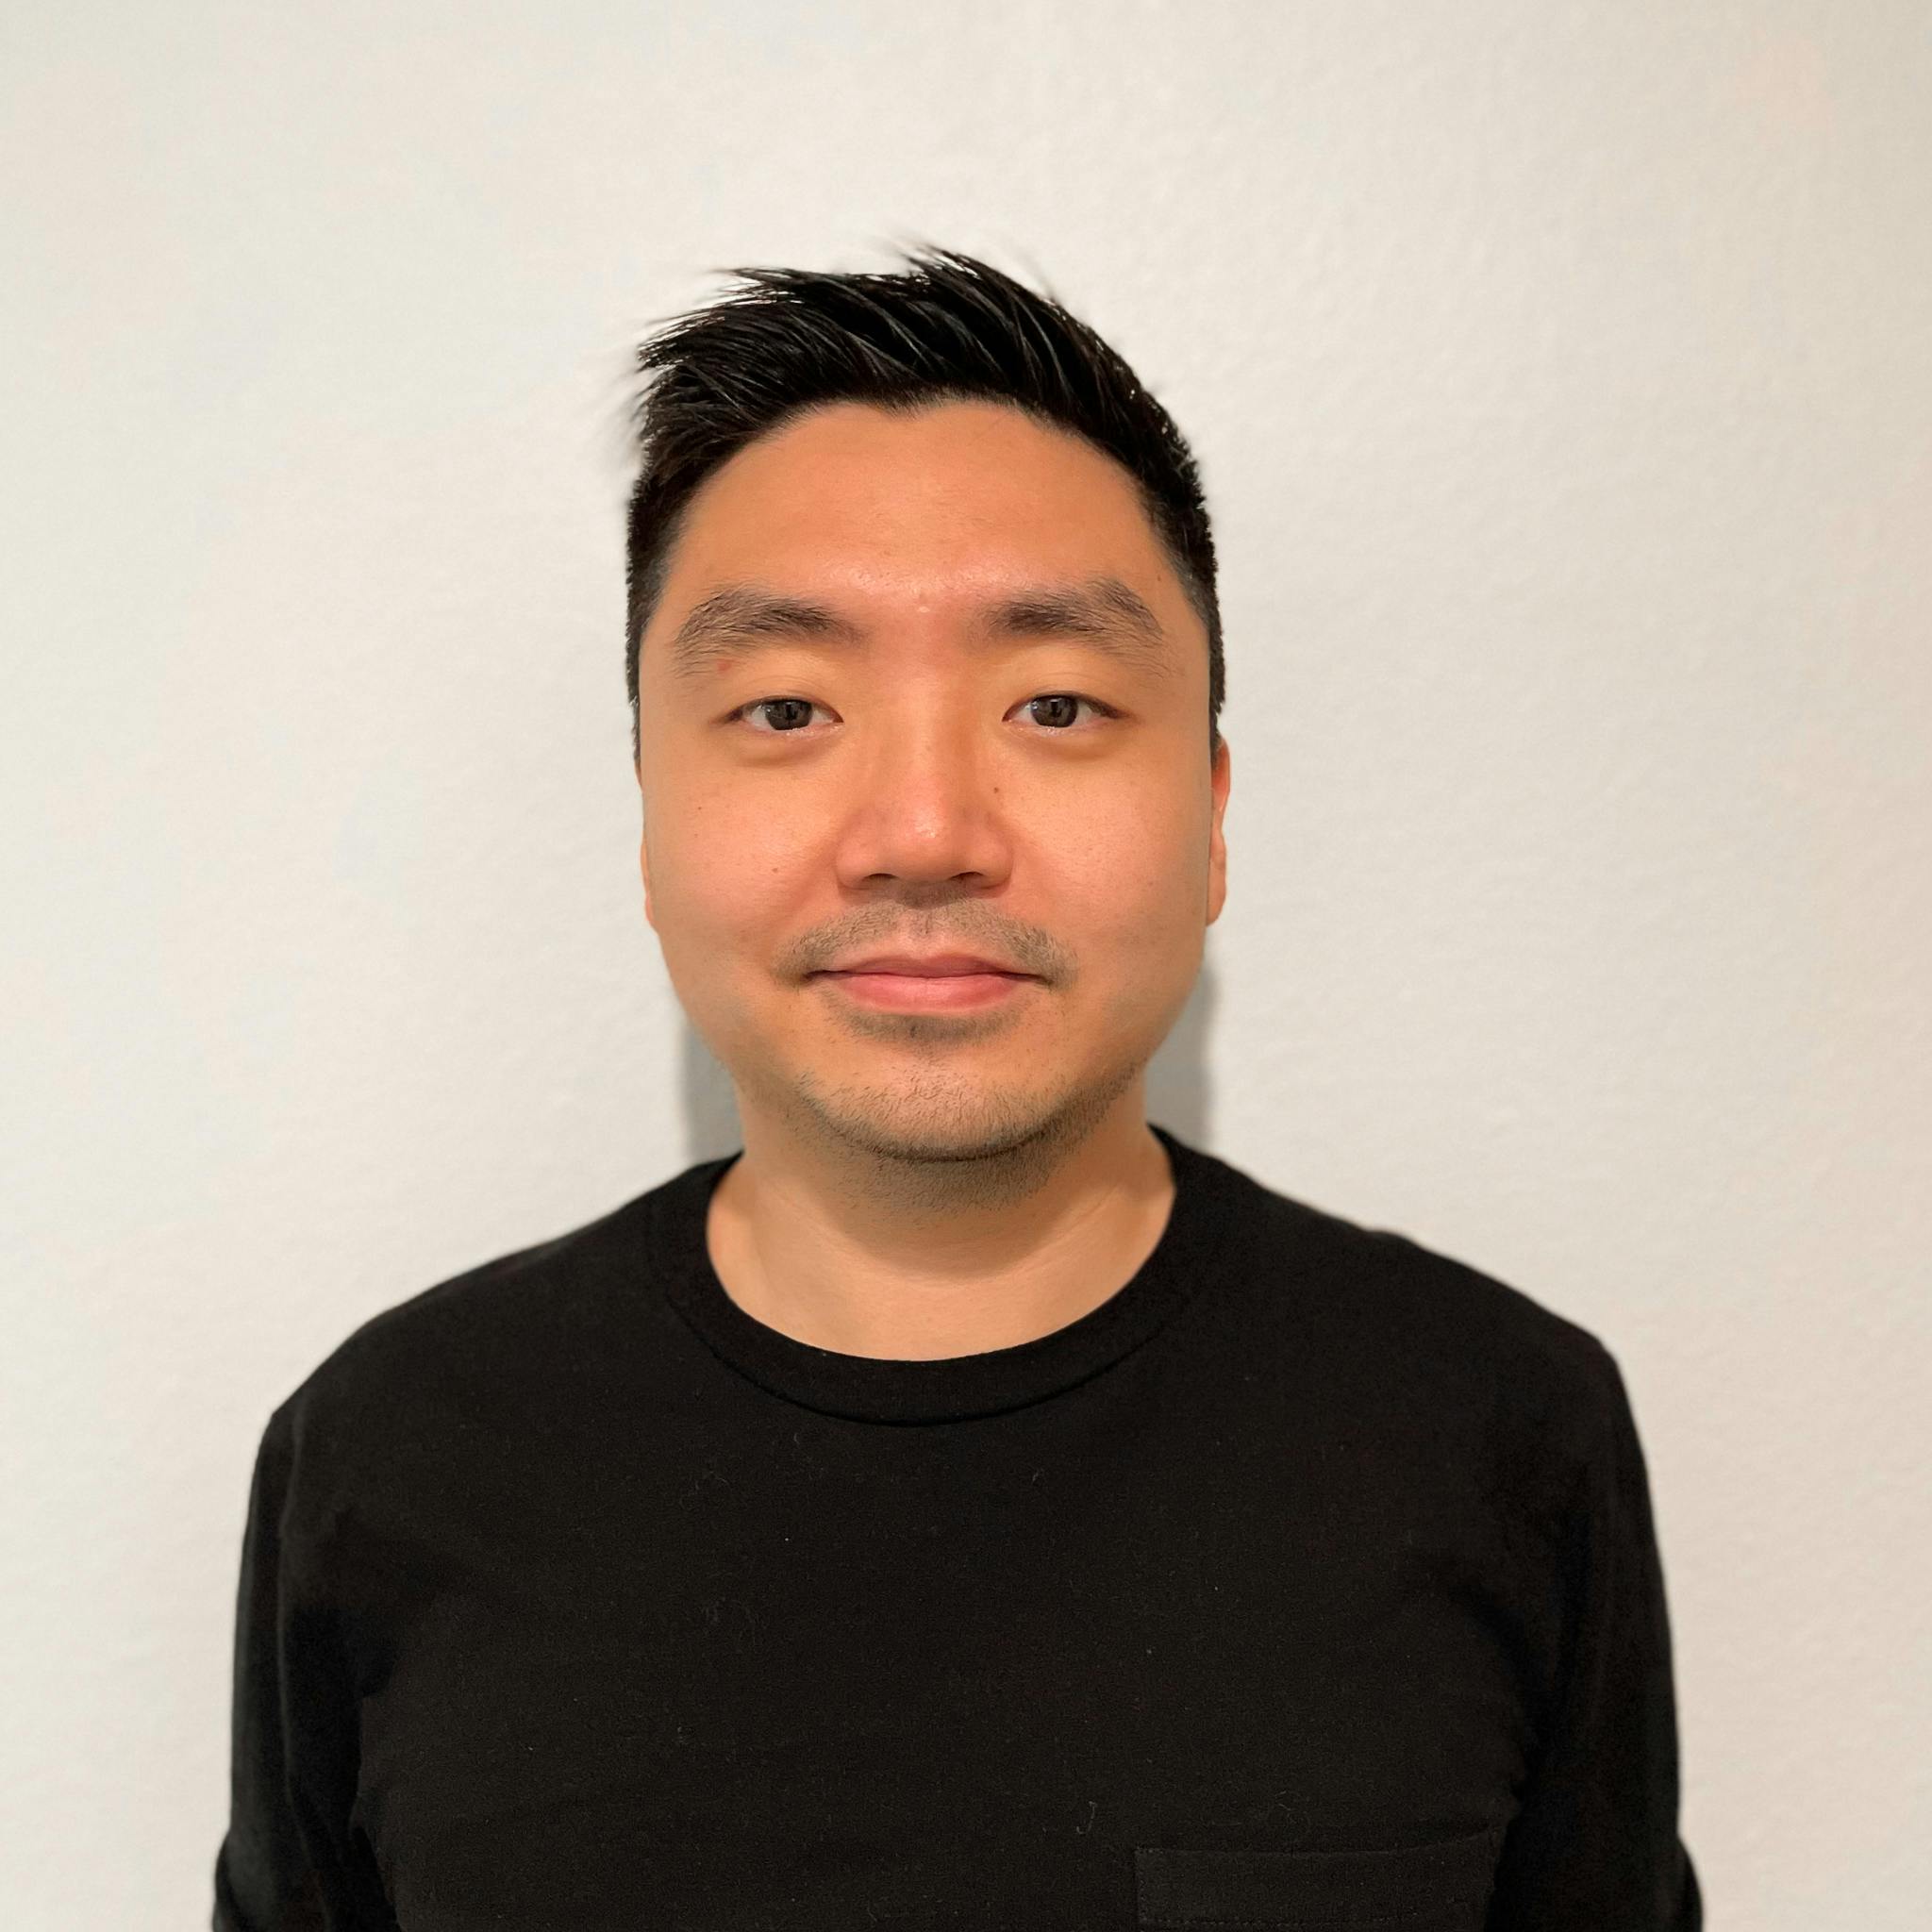 Small business owner and Counterpart employee, Kevin Shi